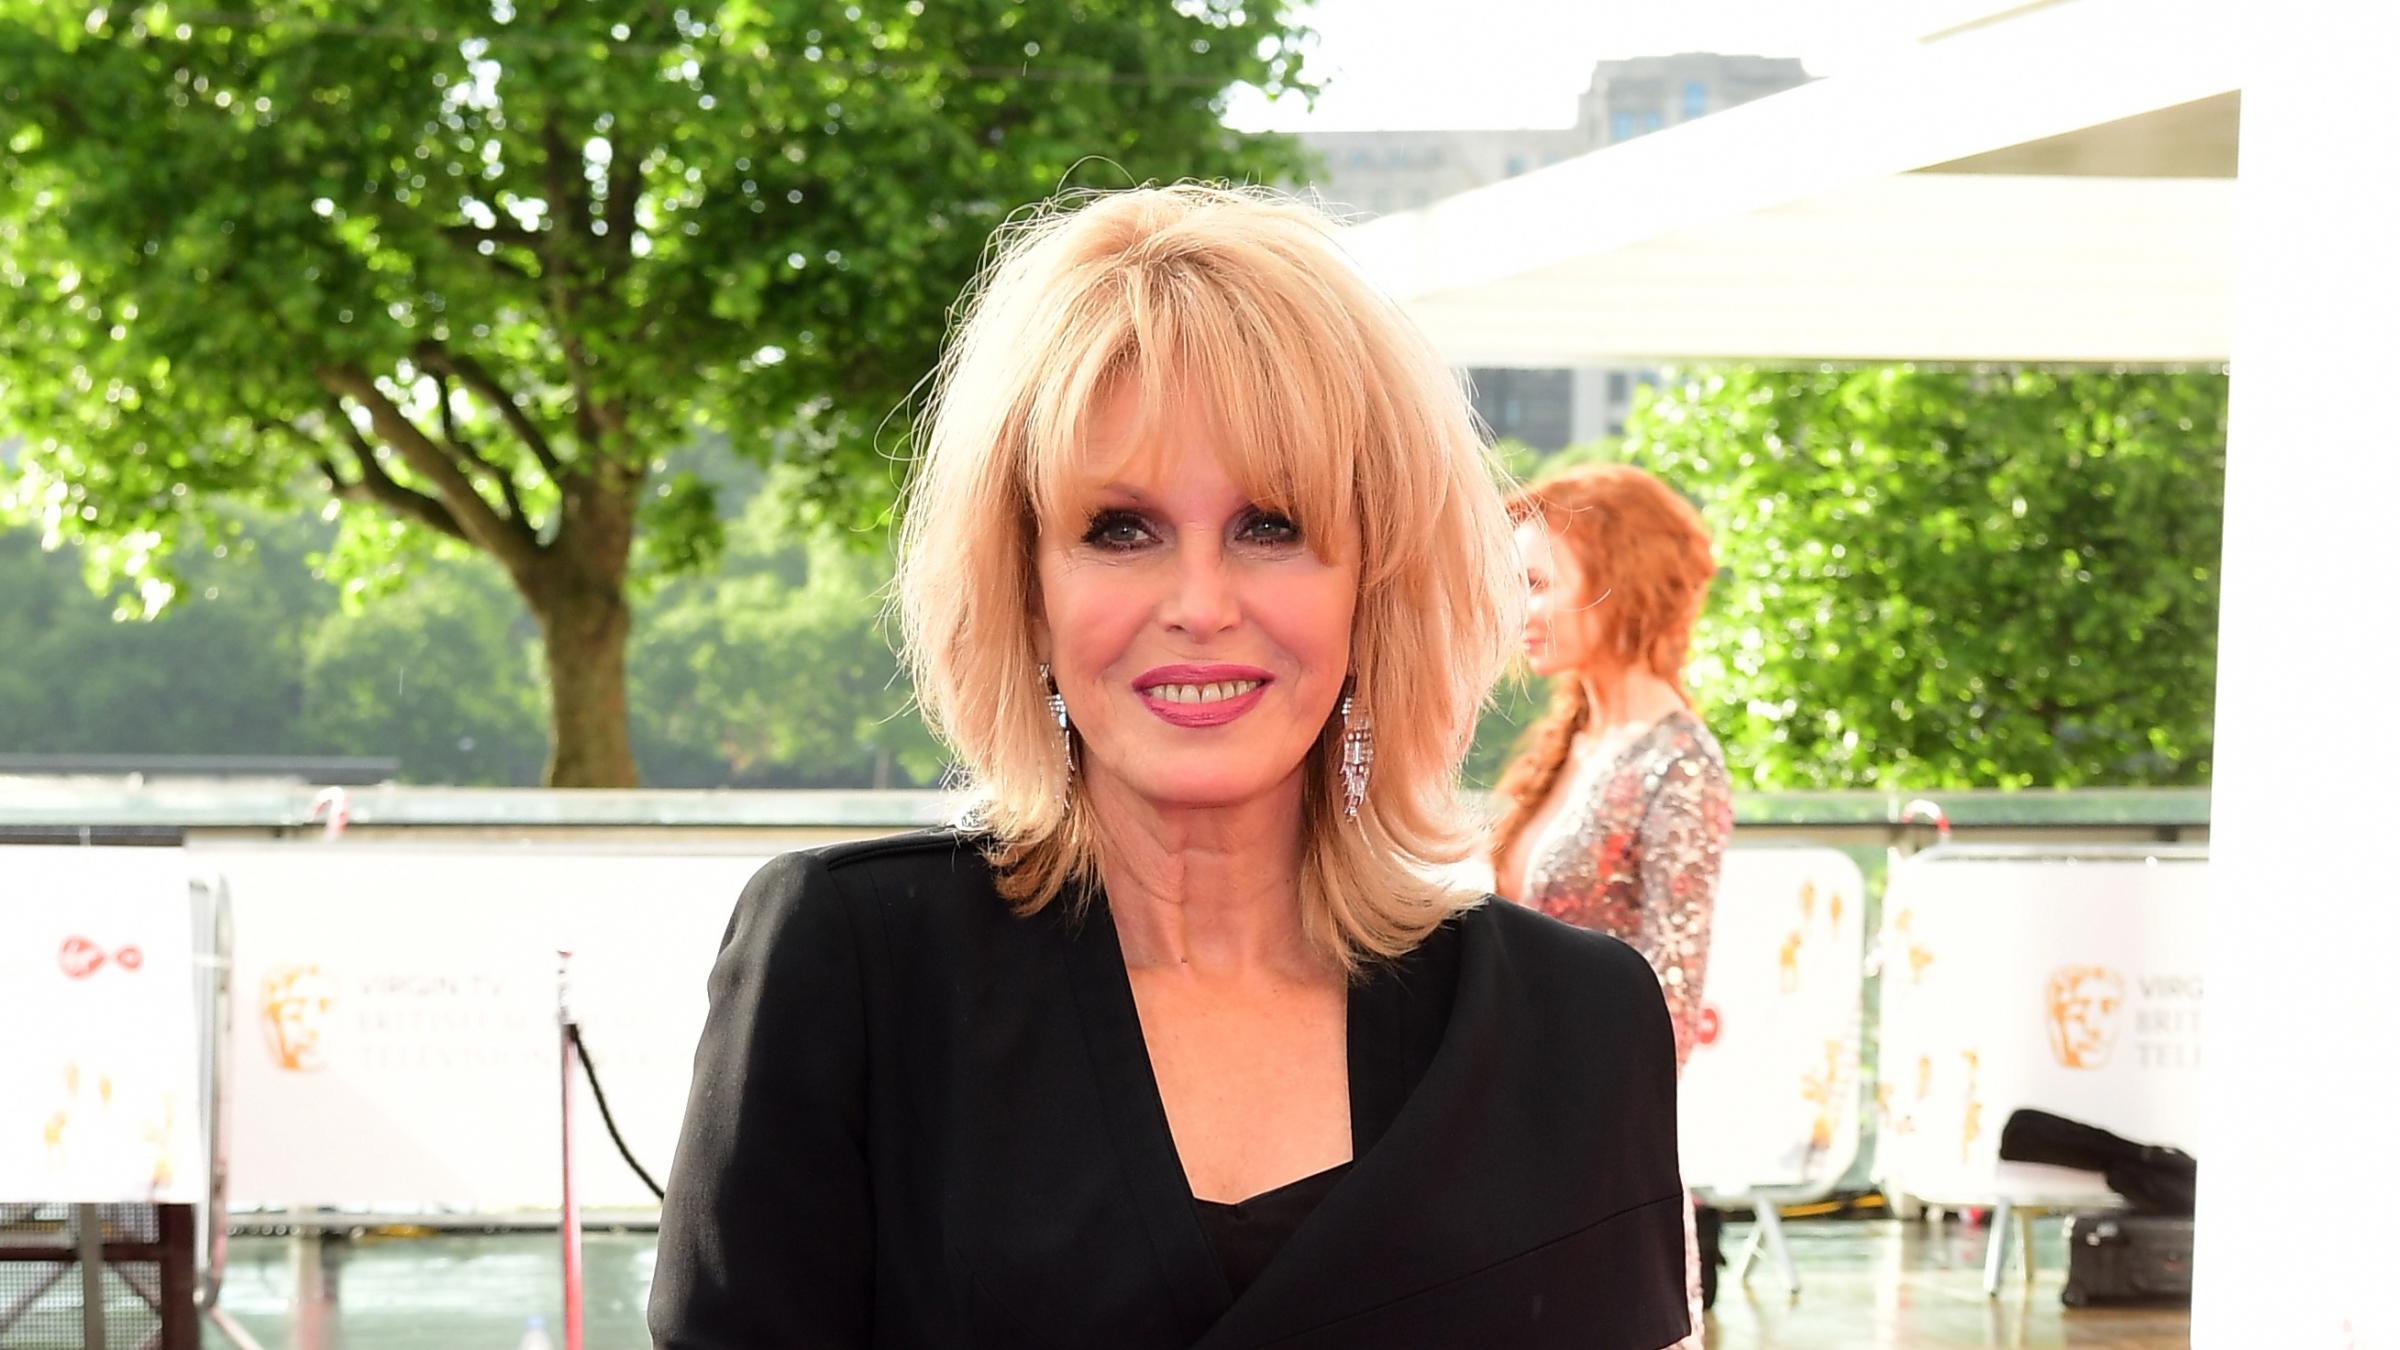 Joanna Lumley urges people to ‘look out for widows’ as she backs charity drive